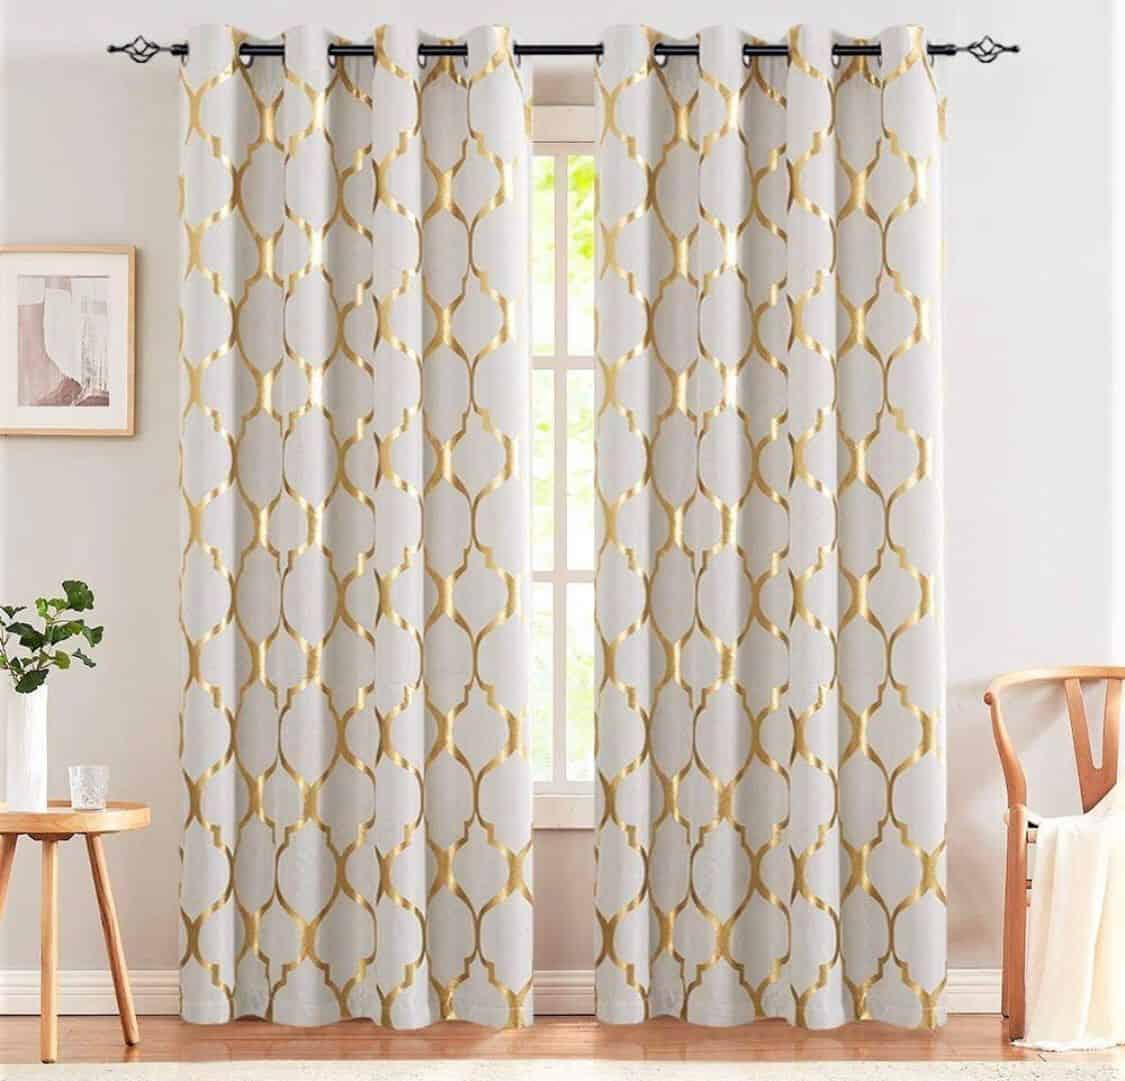 Printed white and gold drapes